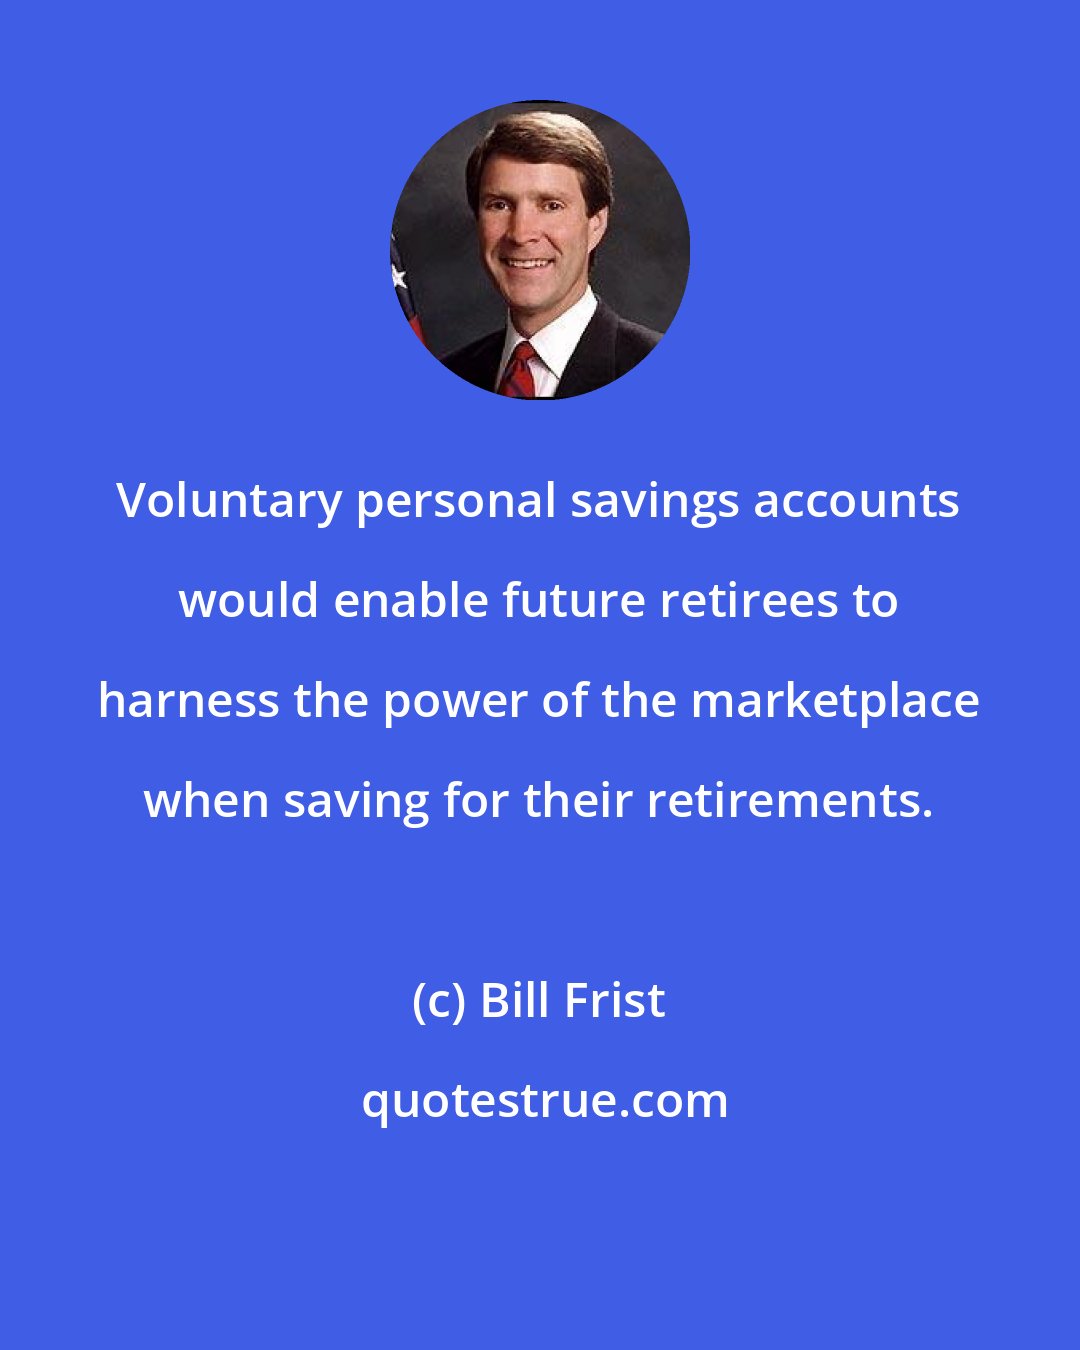 Bill Frist: Voluntary personal savings accounts would enable future retirees to harness the power of the marketplace when saving for their retirements.